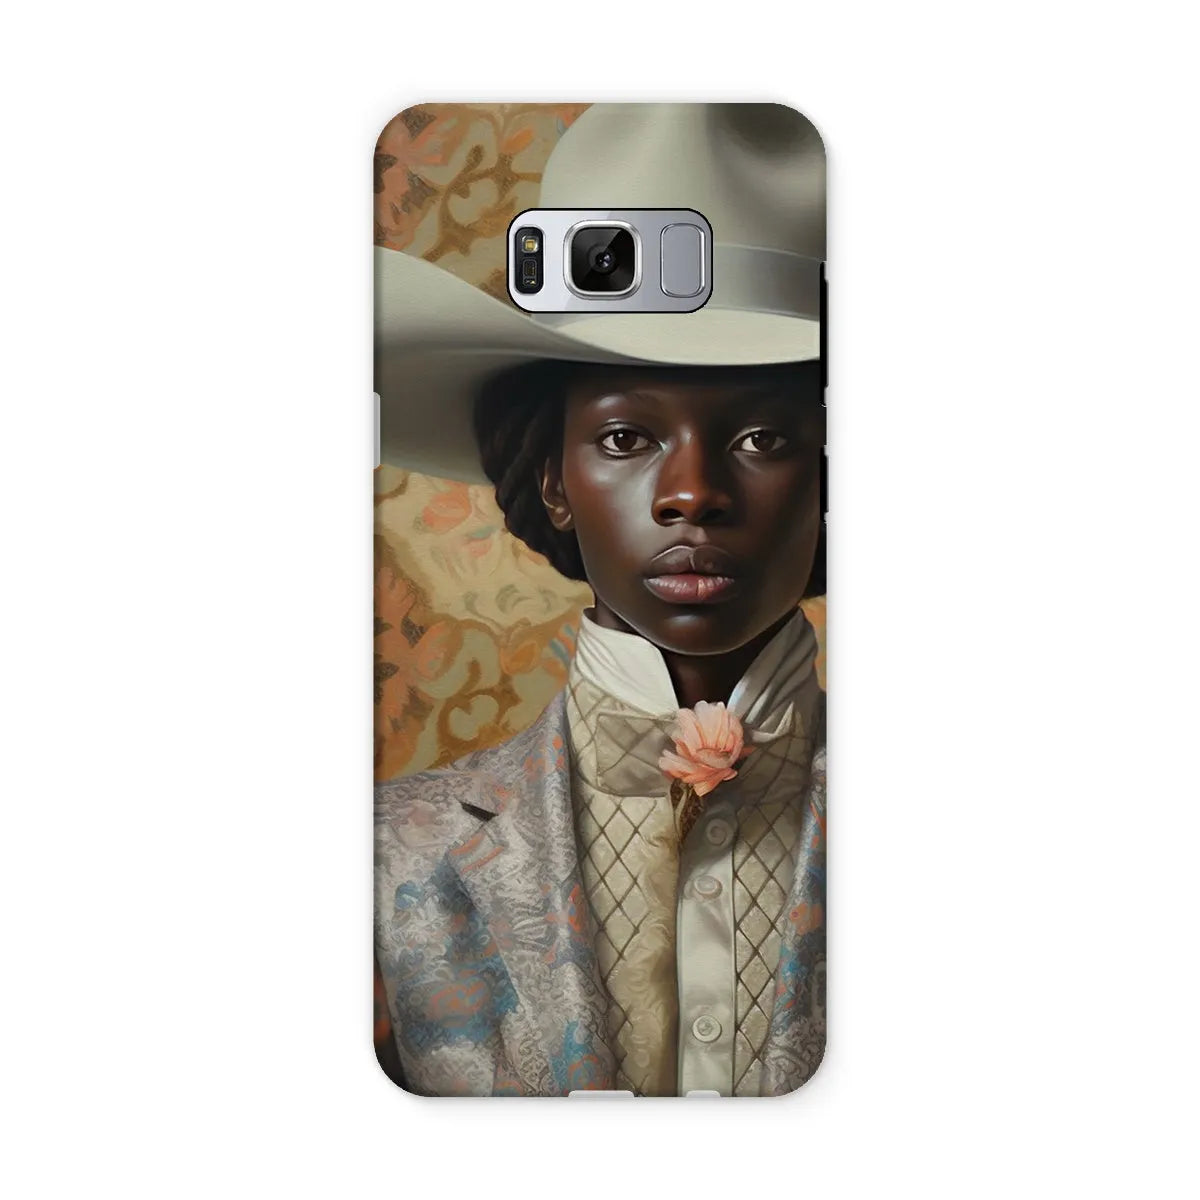 Caesar The Gay Cowboy - Gay Aesthetic Art Phone Case - Samsung Galaxy S8 / Matte - Mobile Phone Cases - Aesthetic Art